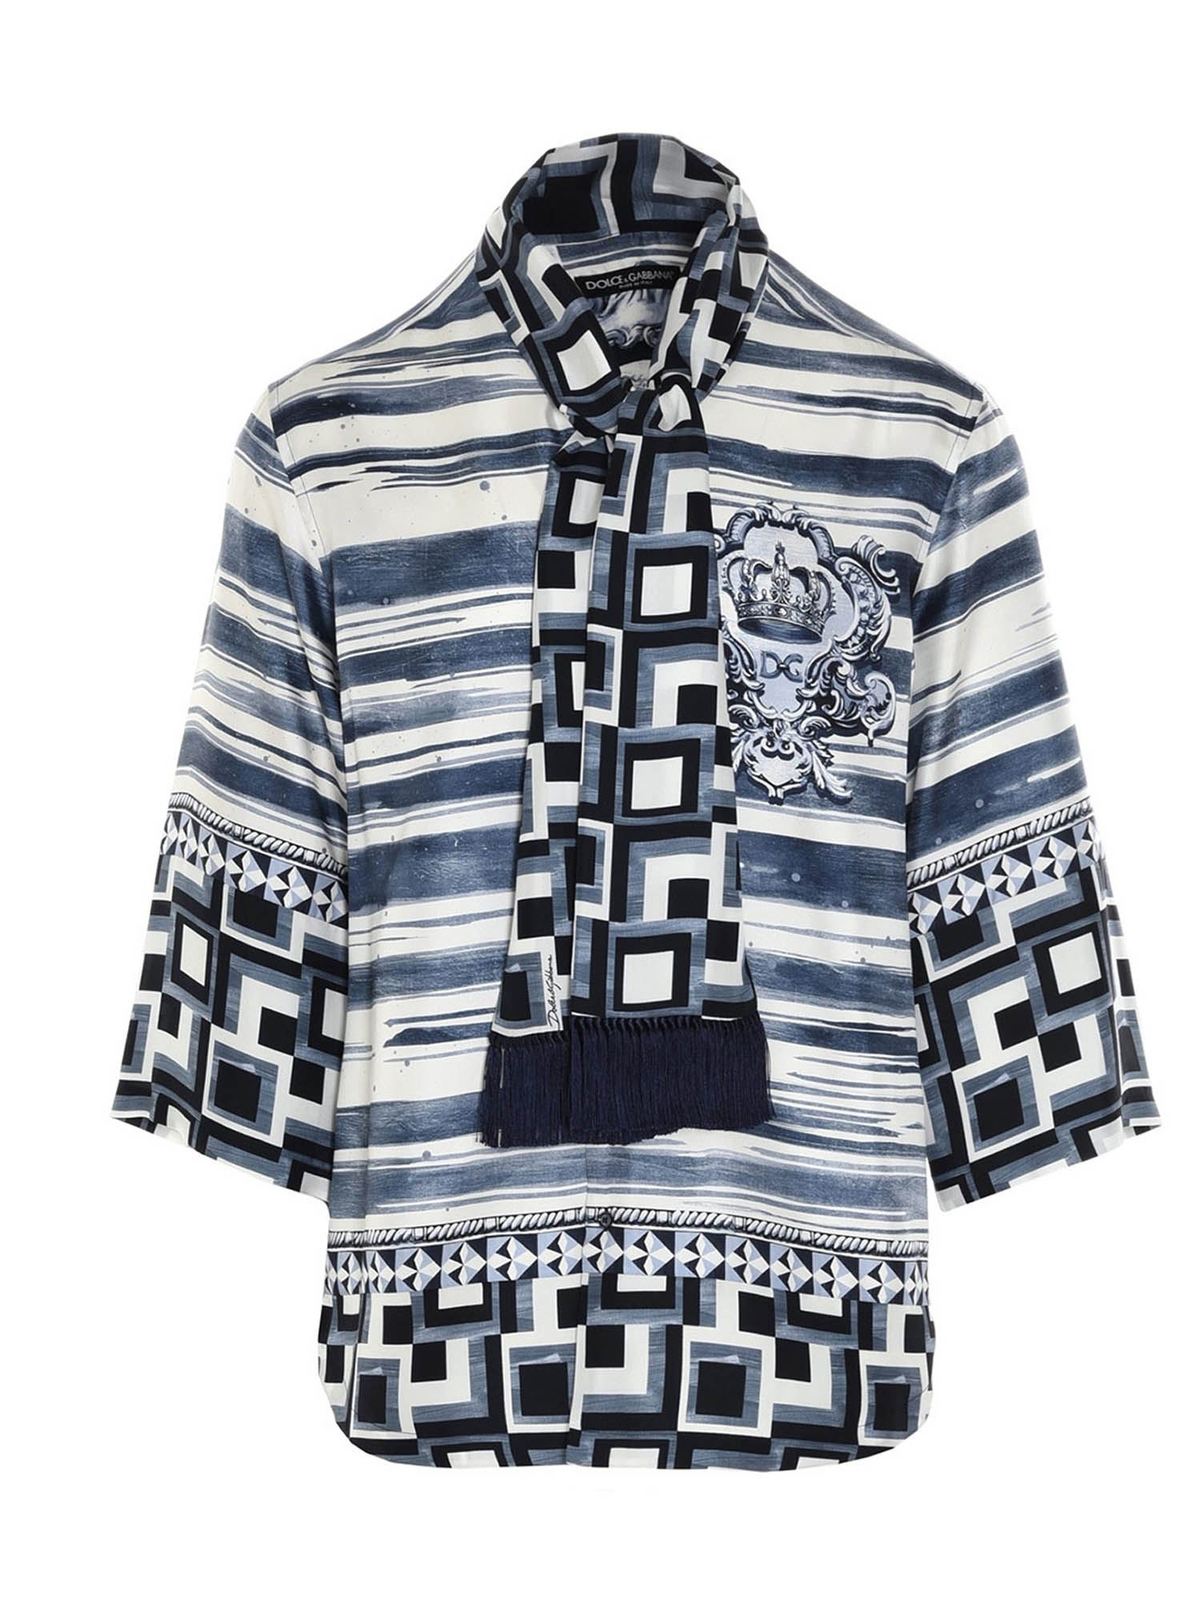 DOLCE & GABBANA PRINTED SHIRT IN BLUE AND WHITE